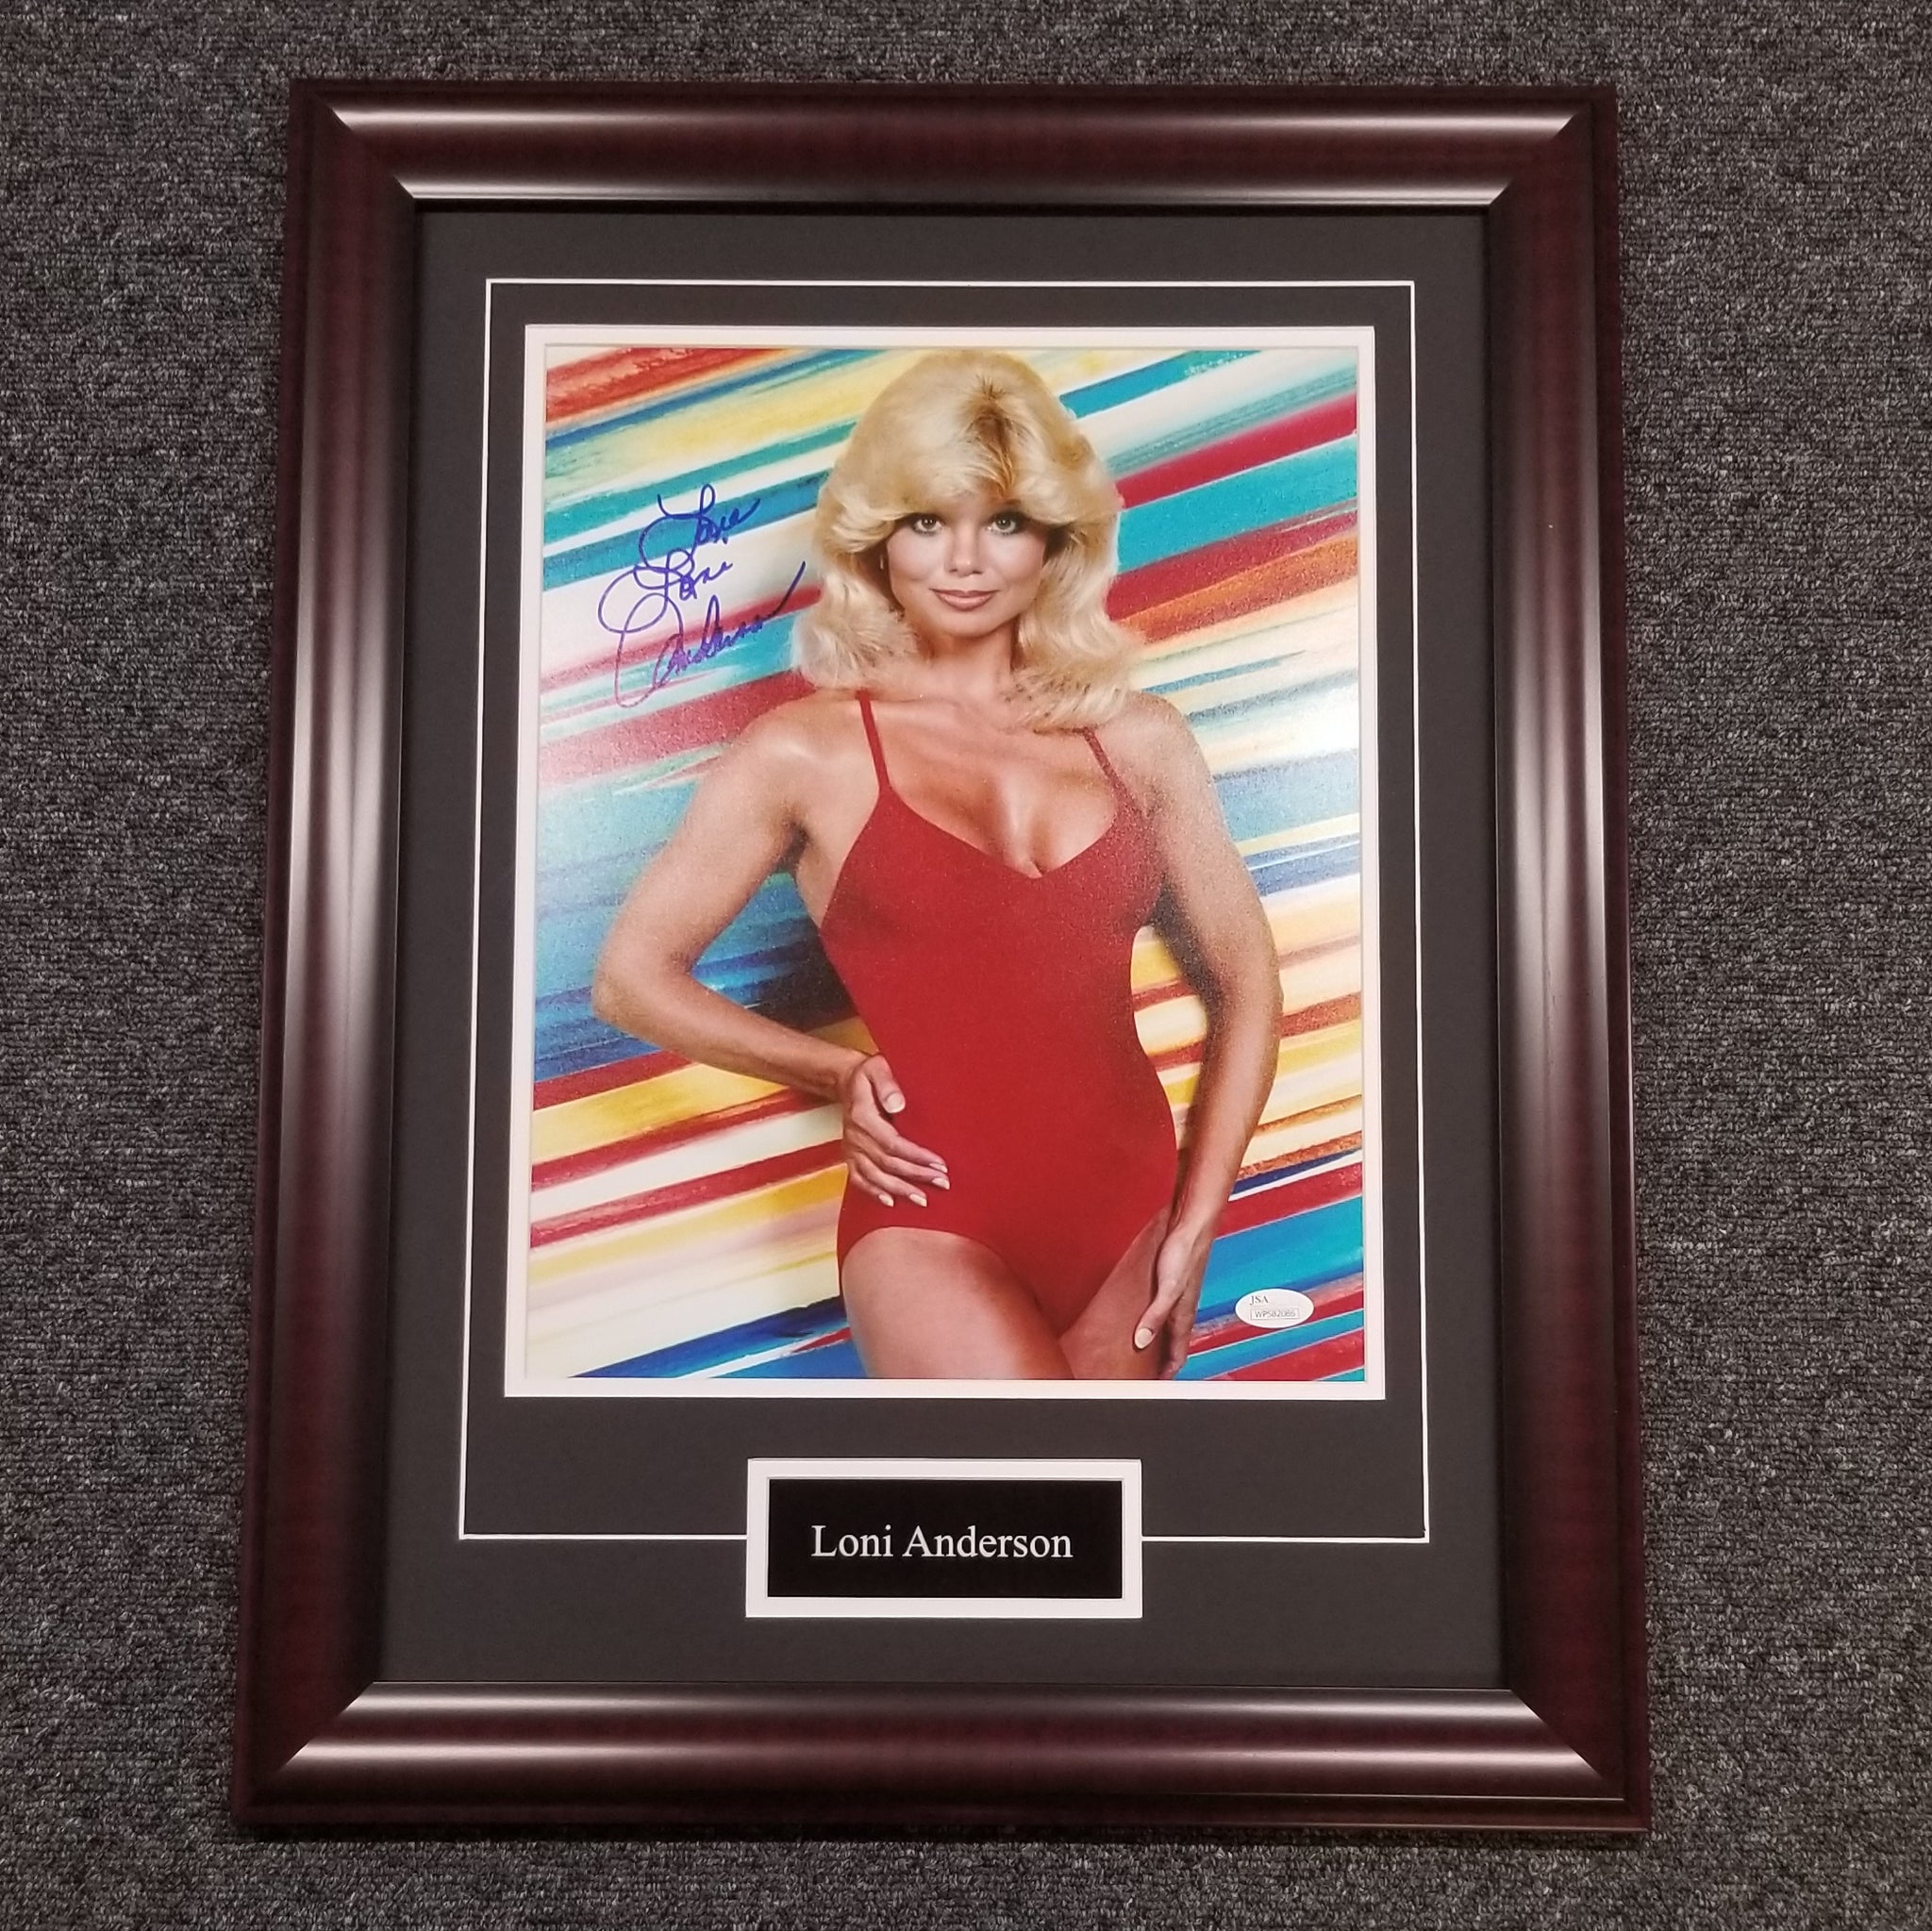 Loni Anderson Signed 11x14